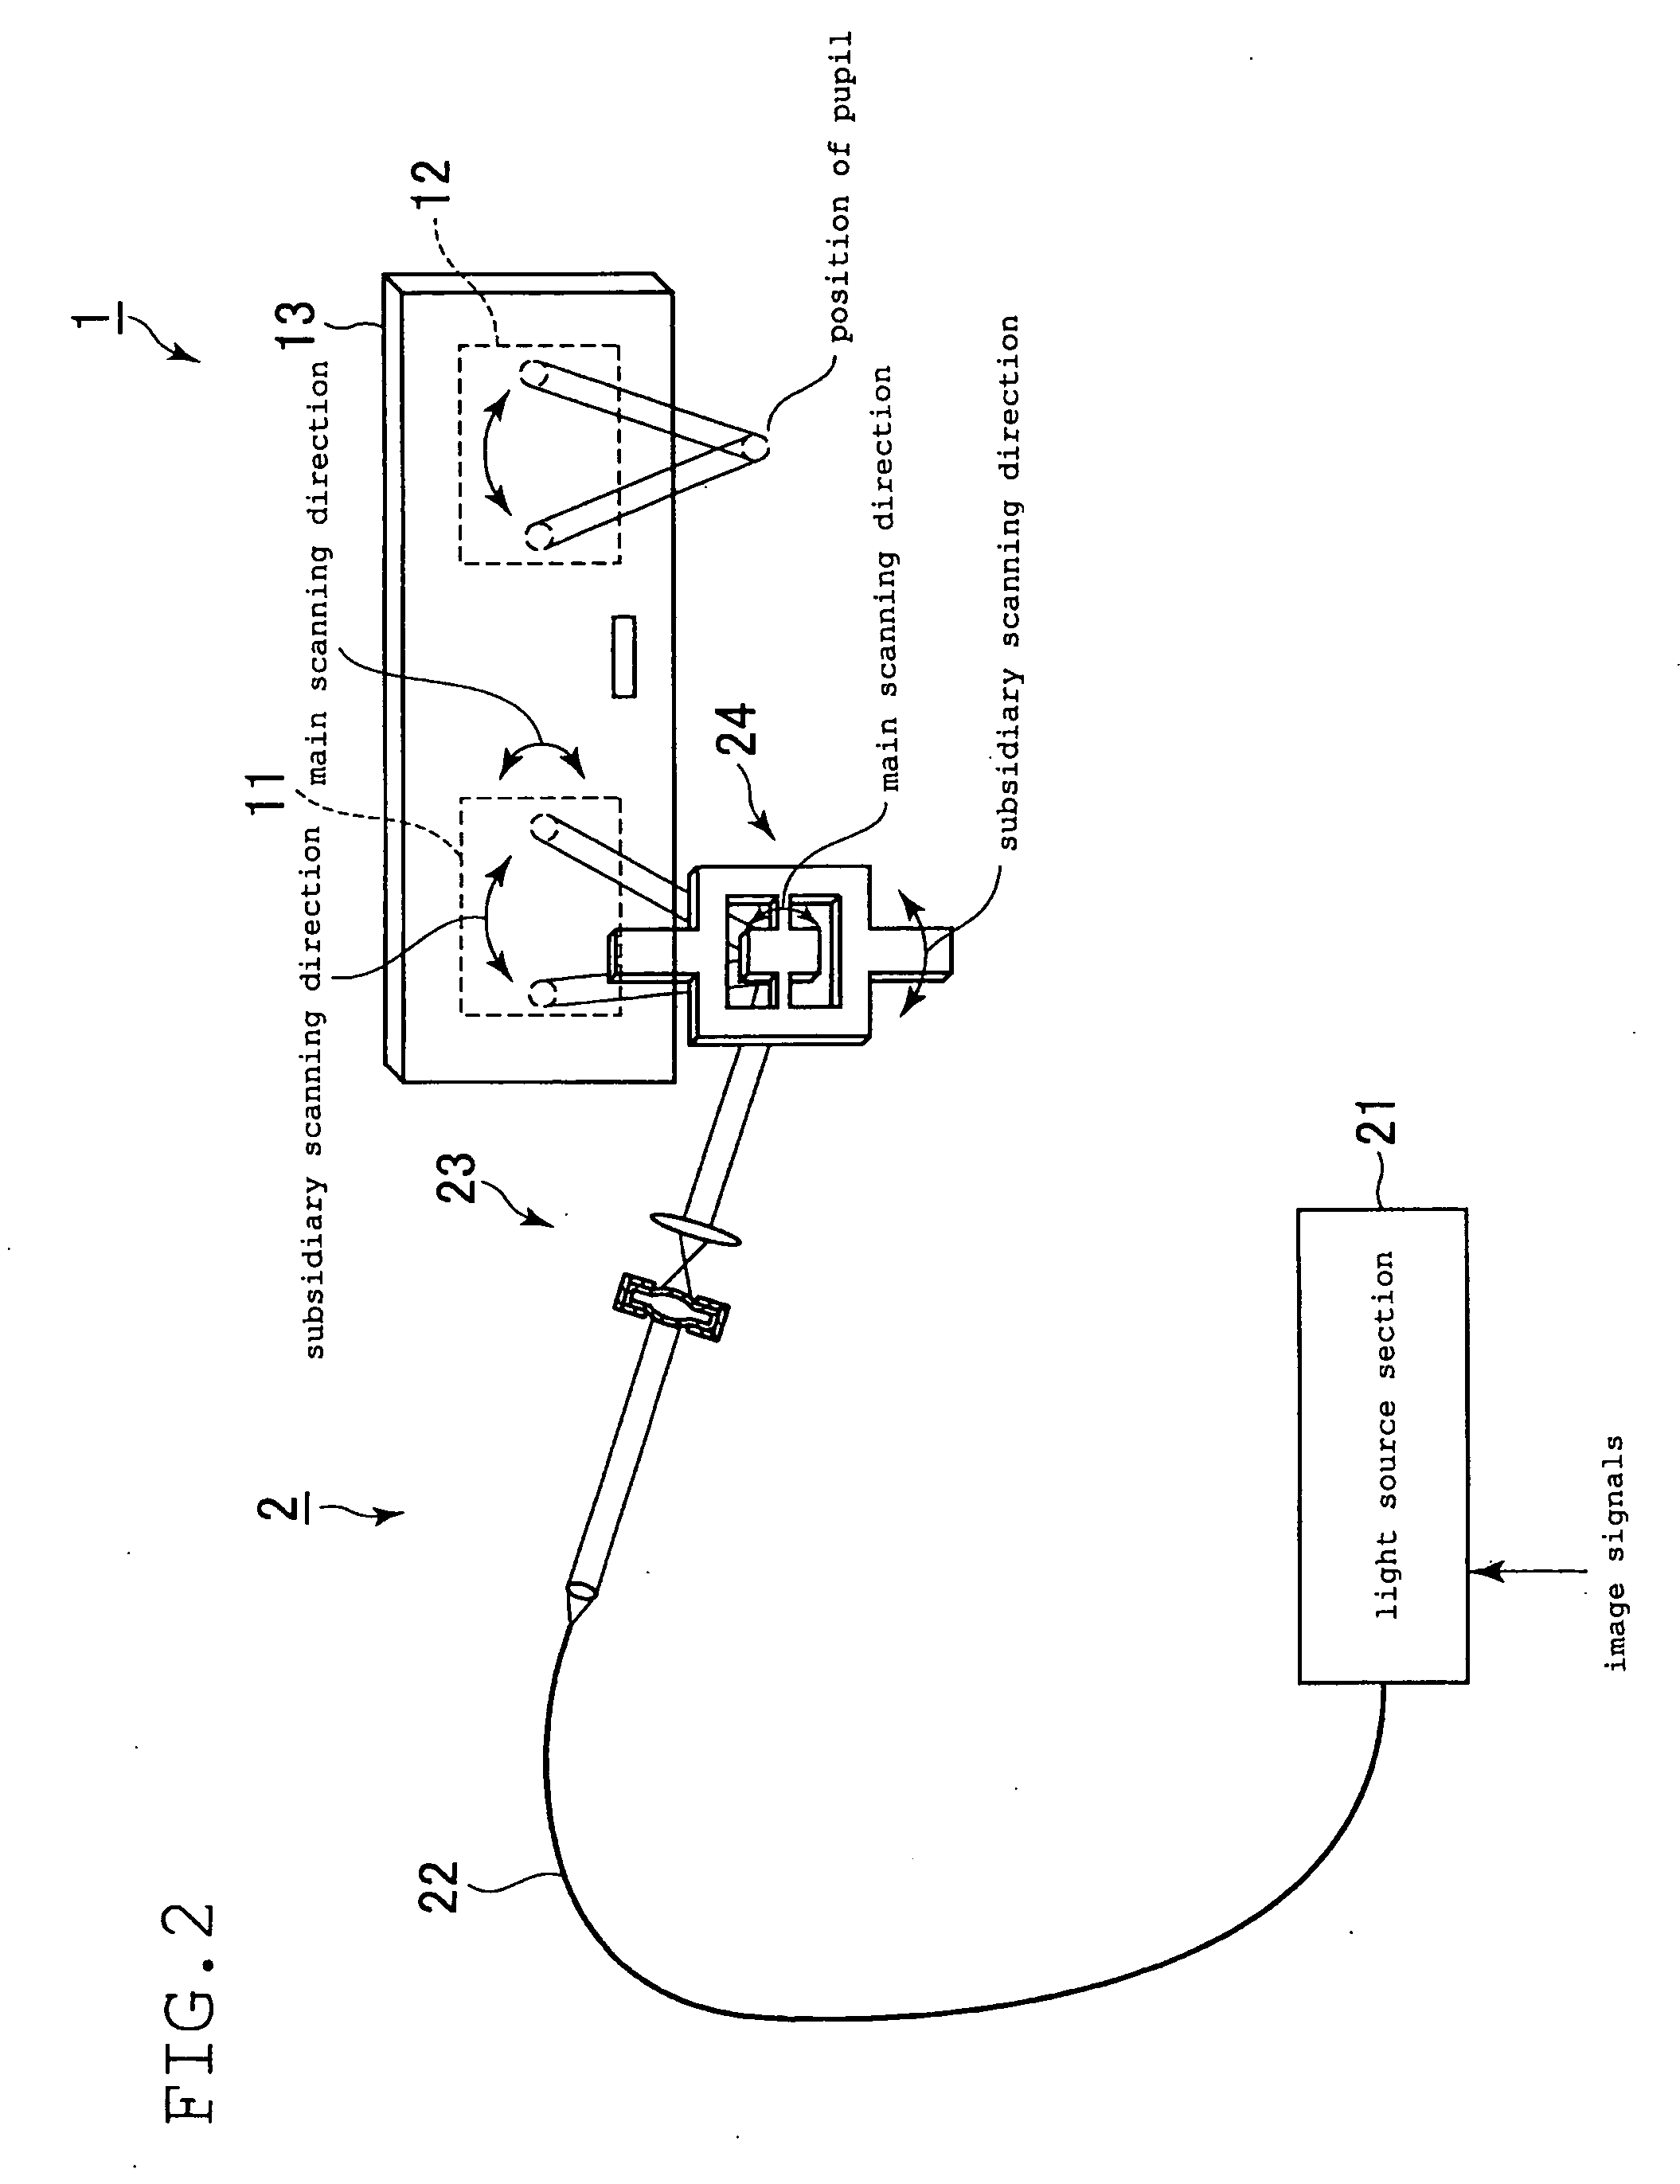 Optical system for light flux transfer, and retinal scanning display using such an optical system